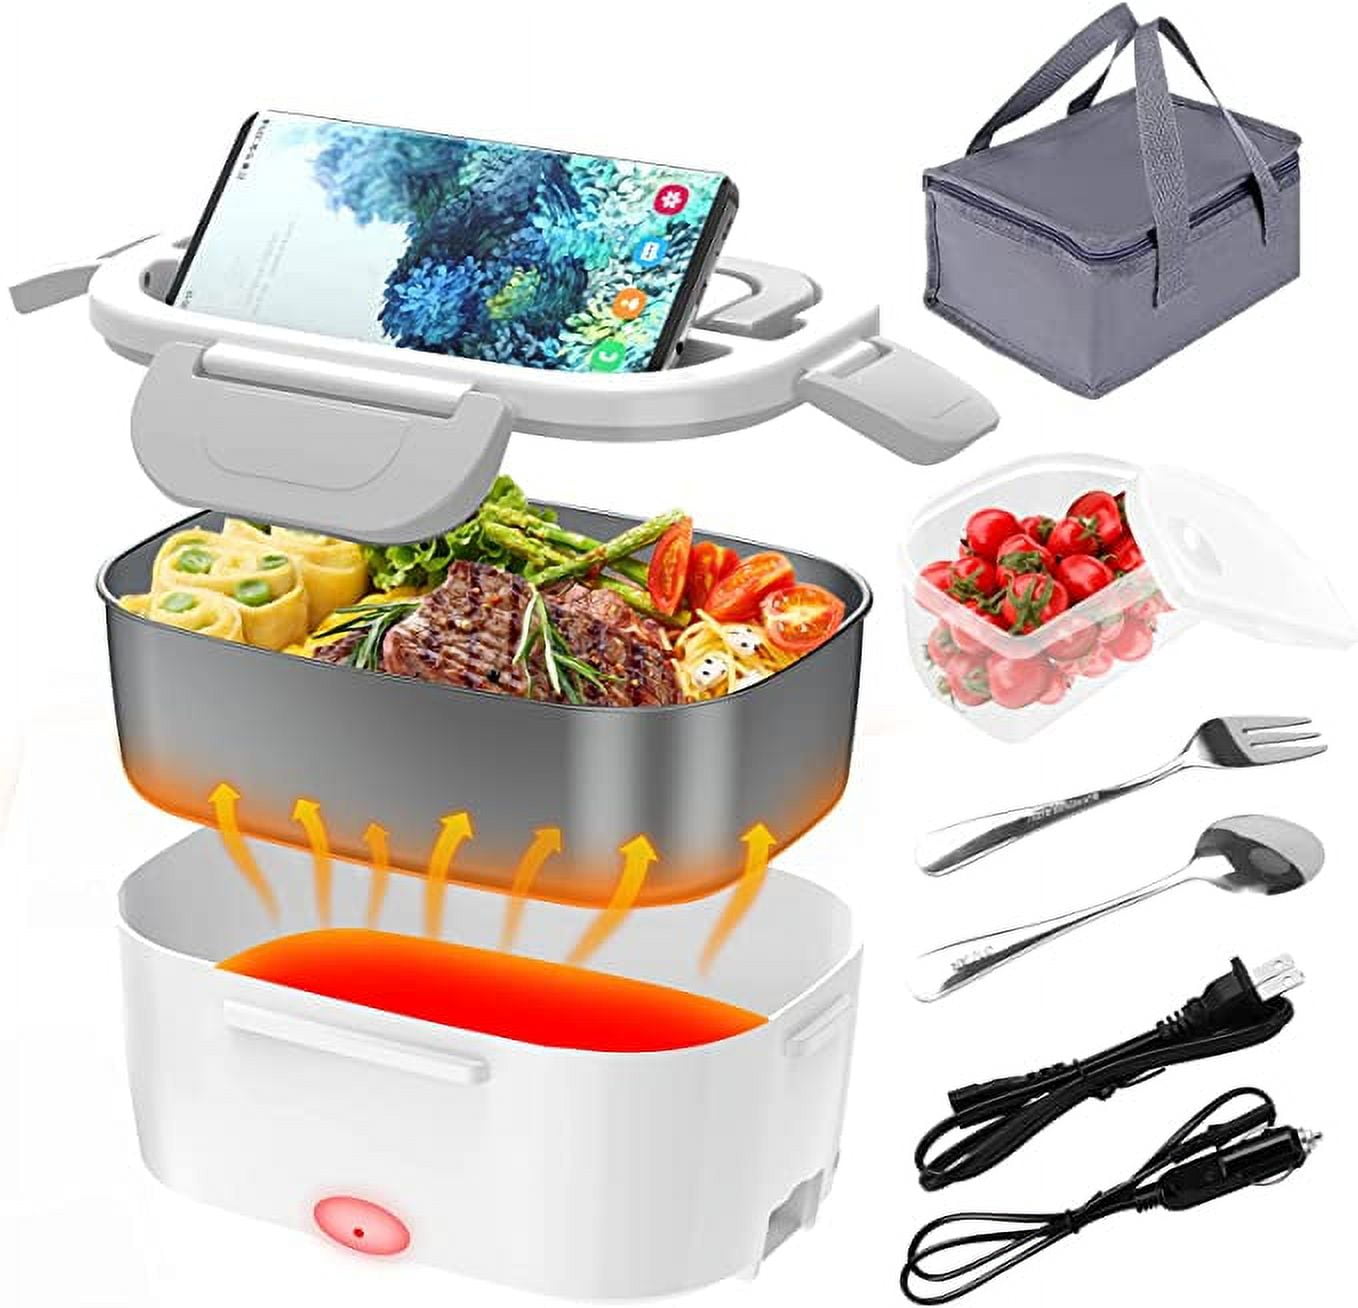 Vabaso Electric Lunch Box Food Heater, 60-80W Electric Heating Lunch Boxes  Lunch for Car/Men/Adults/…See more Vabaso Electric Lunch Box Food Heater